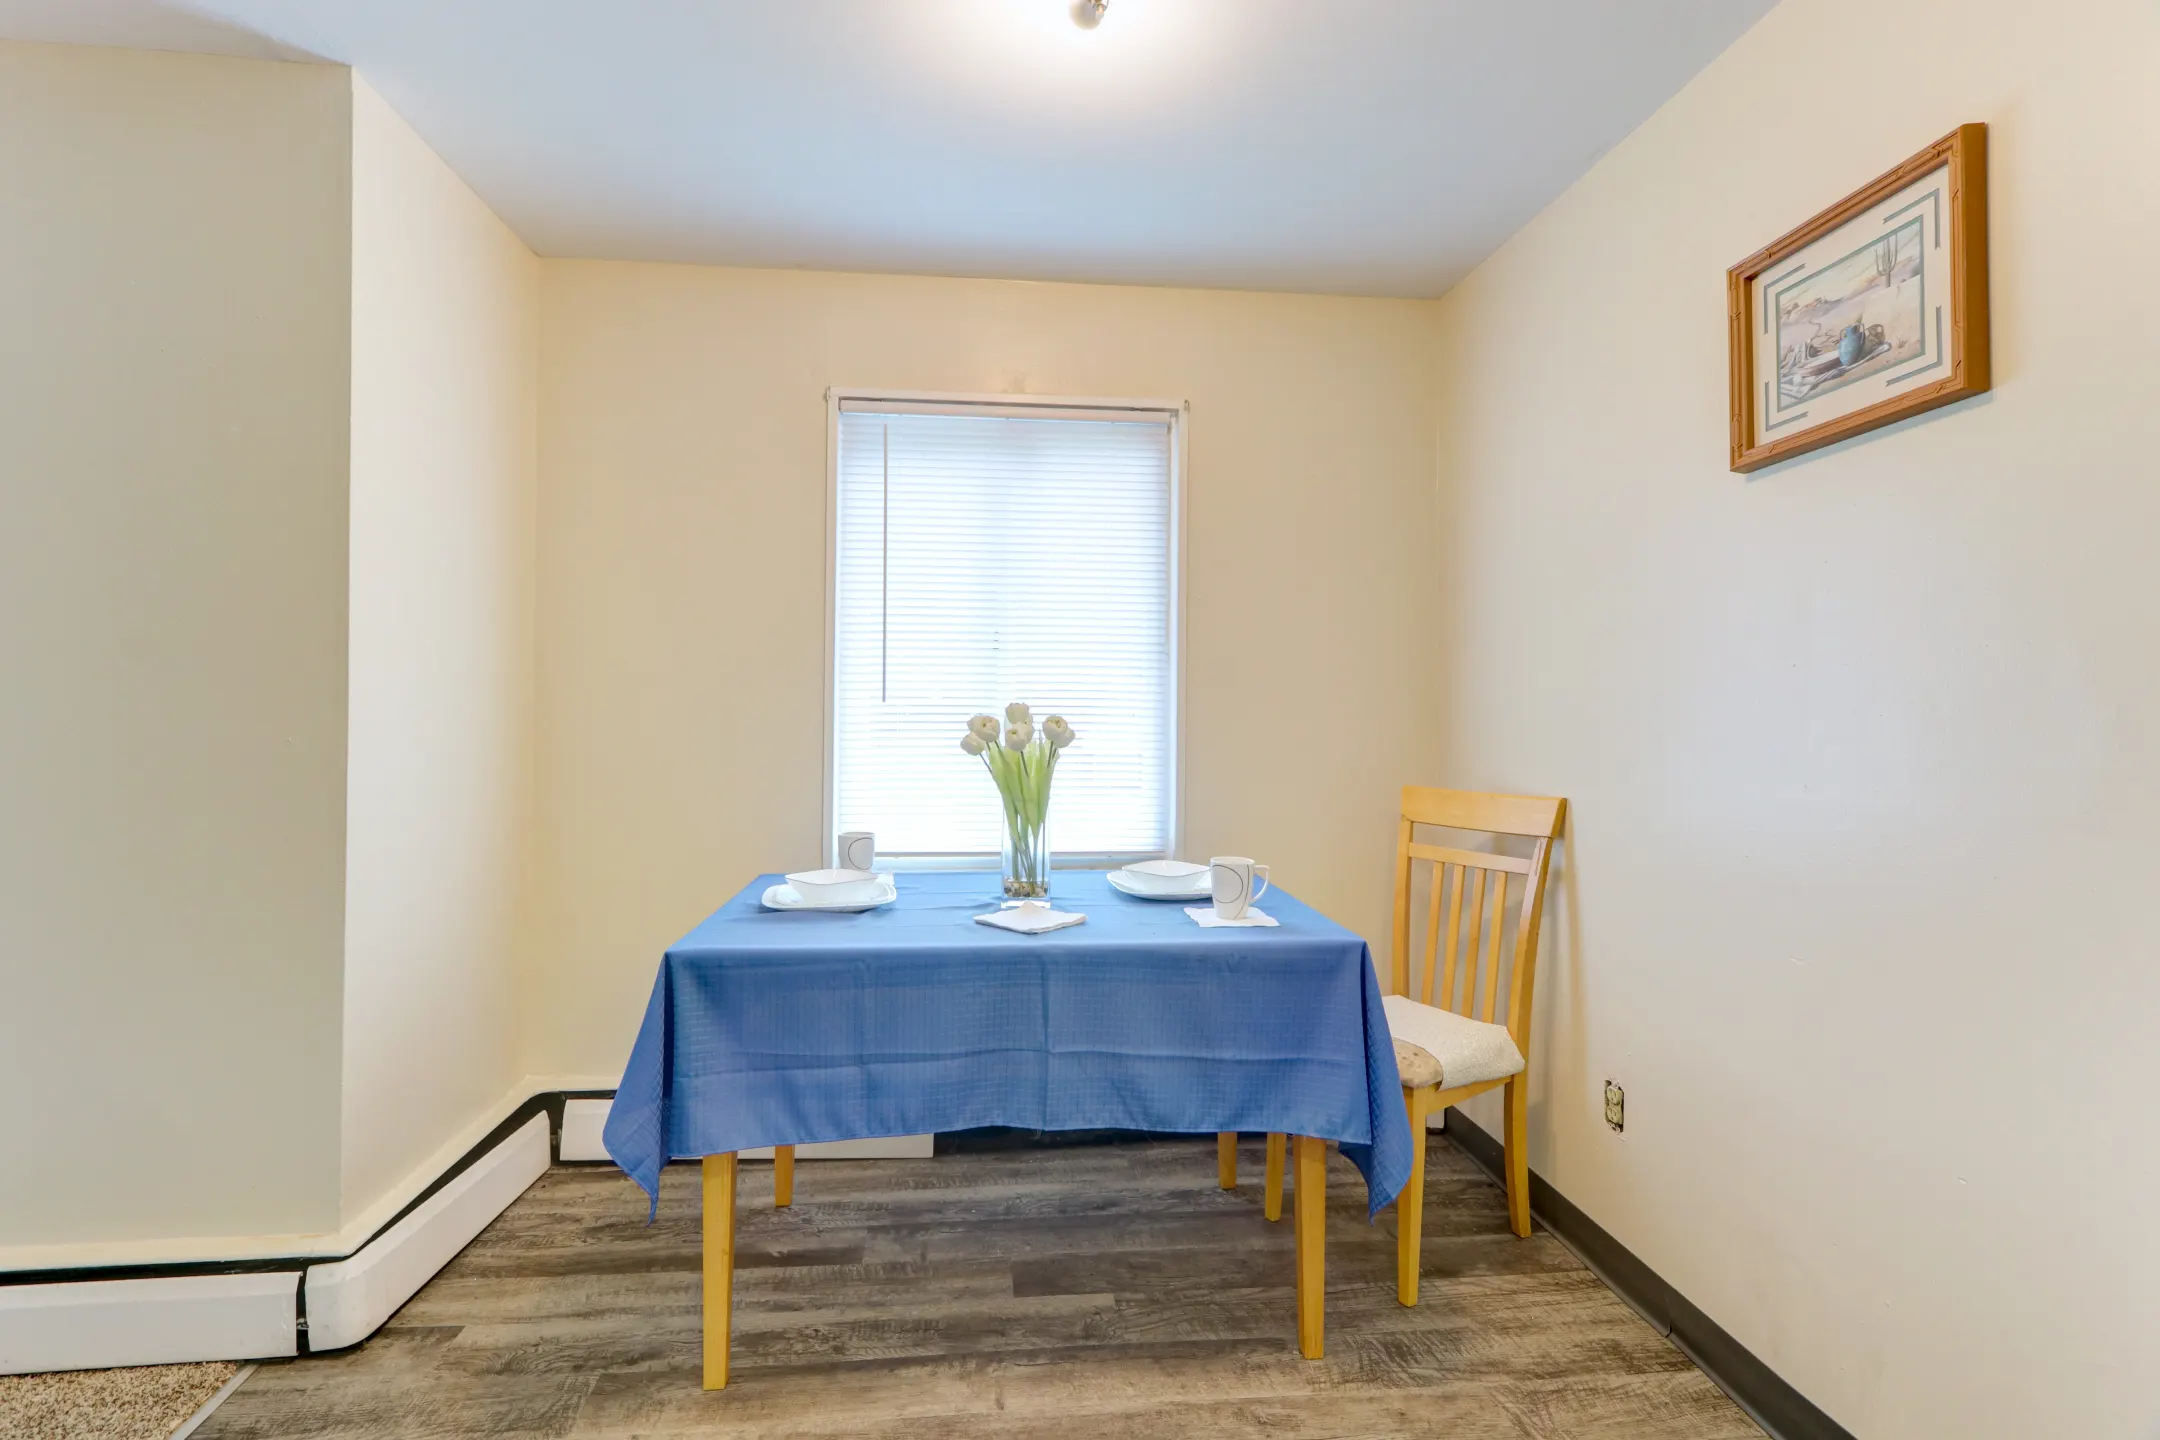 Dining Room - Seneca Oaks Apartments - Youngstown, OH